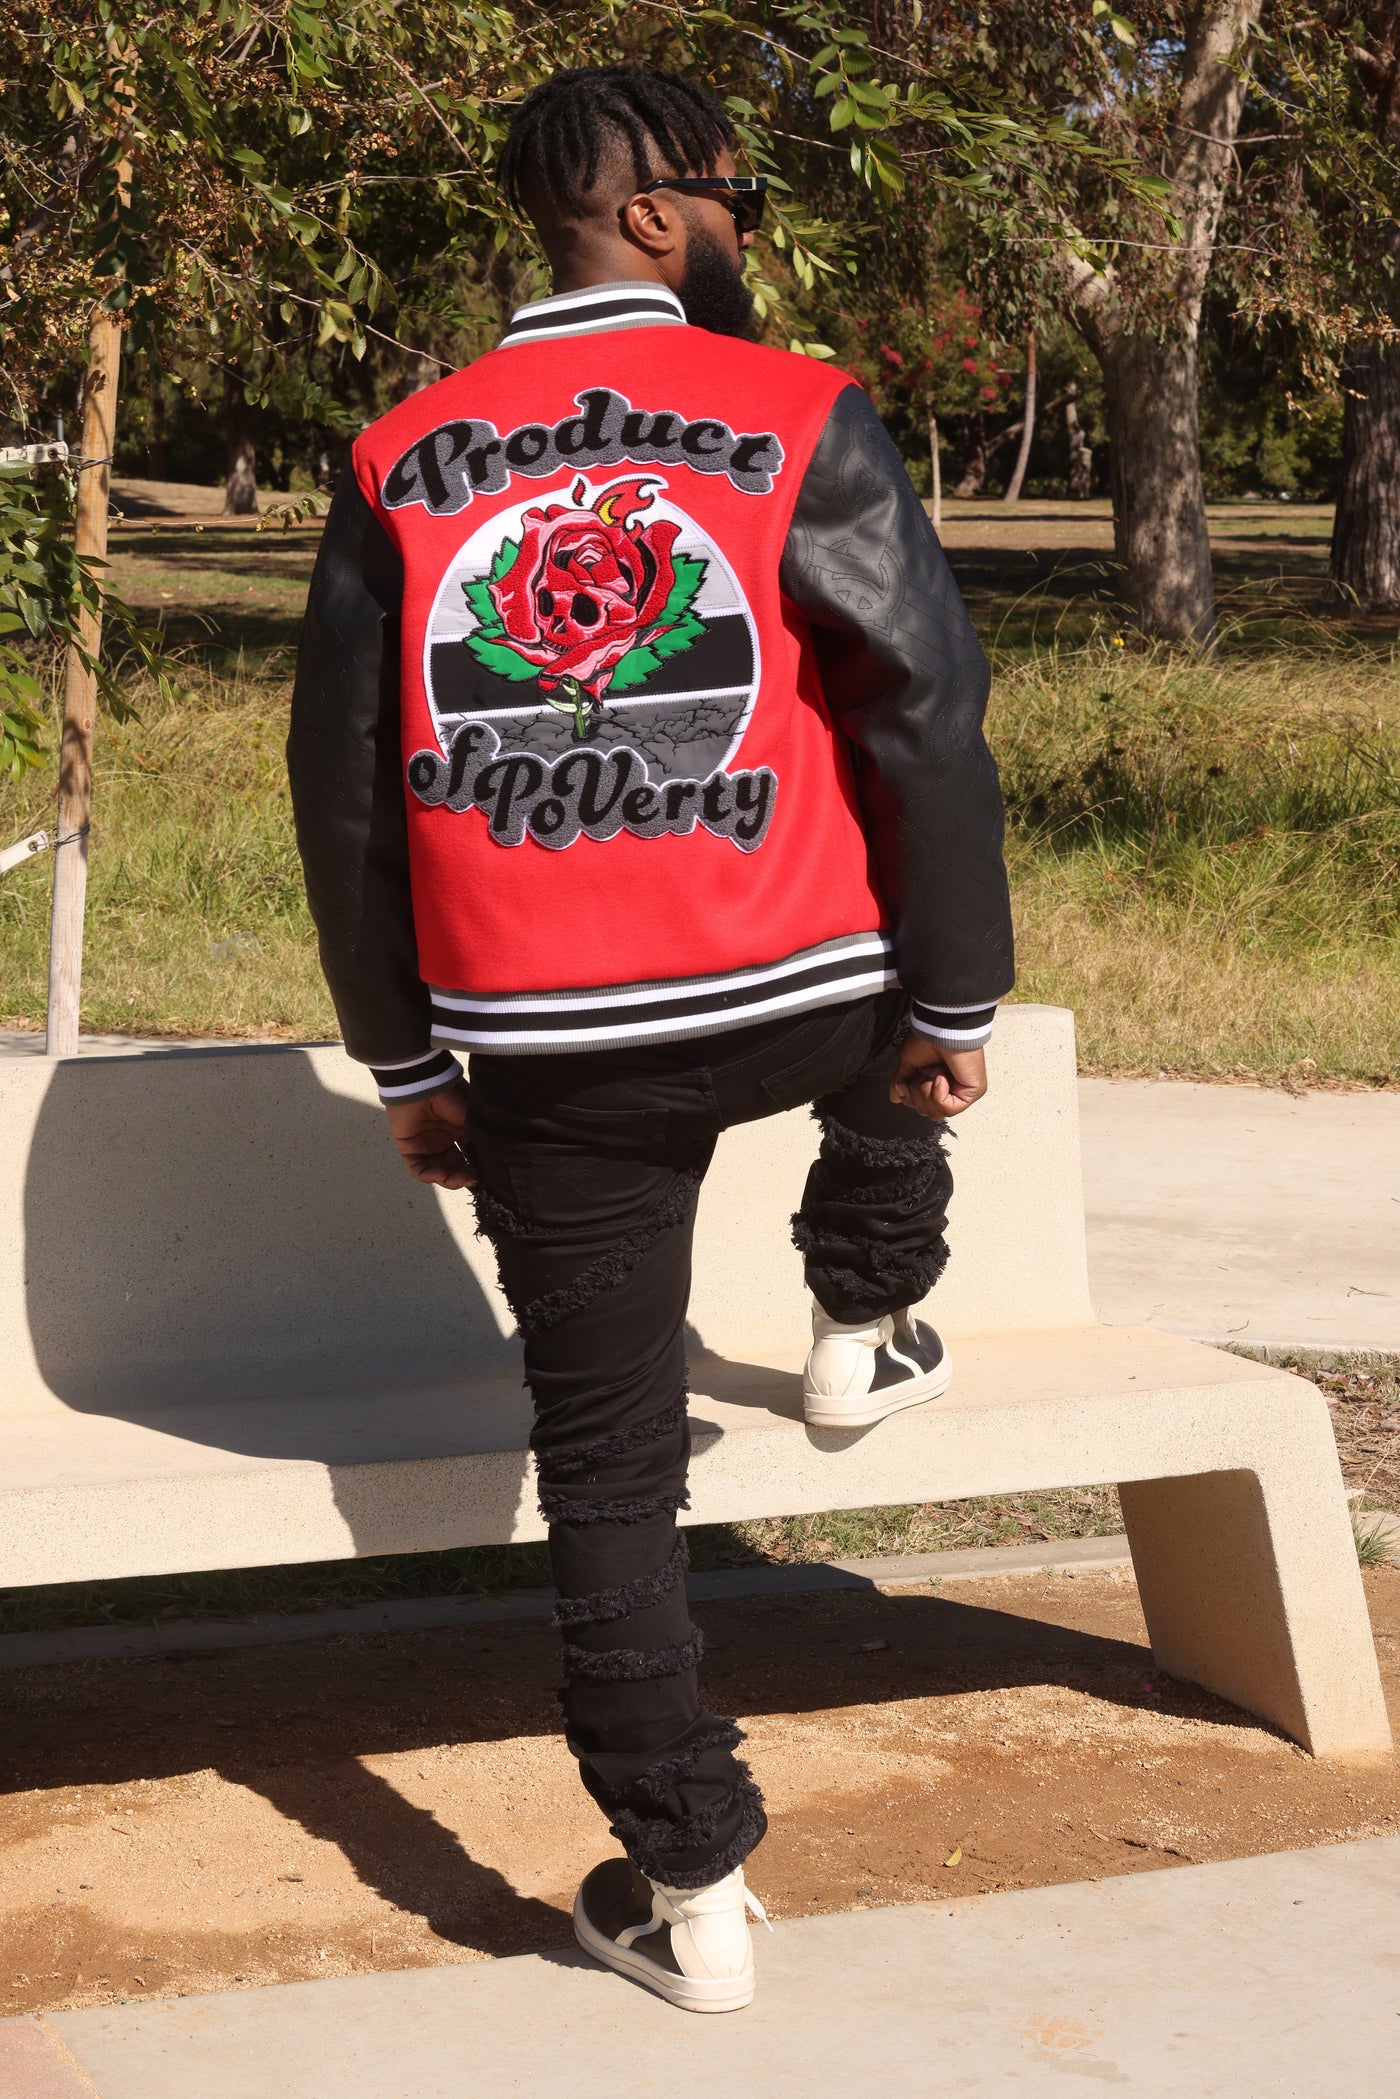 F1026 Product of Poverty Varsity Jacket - Red